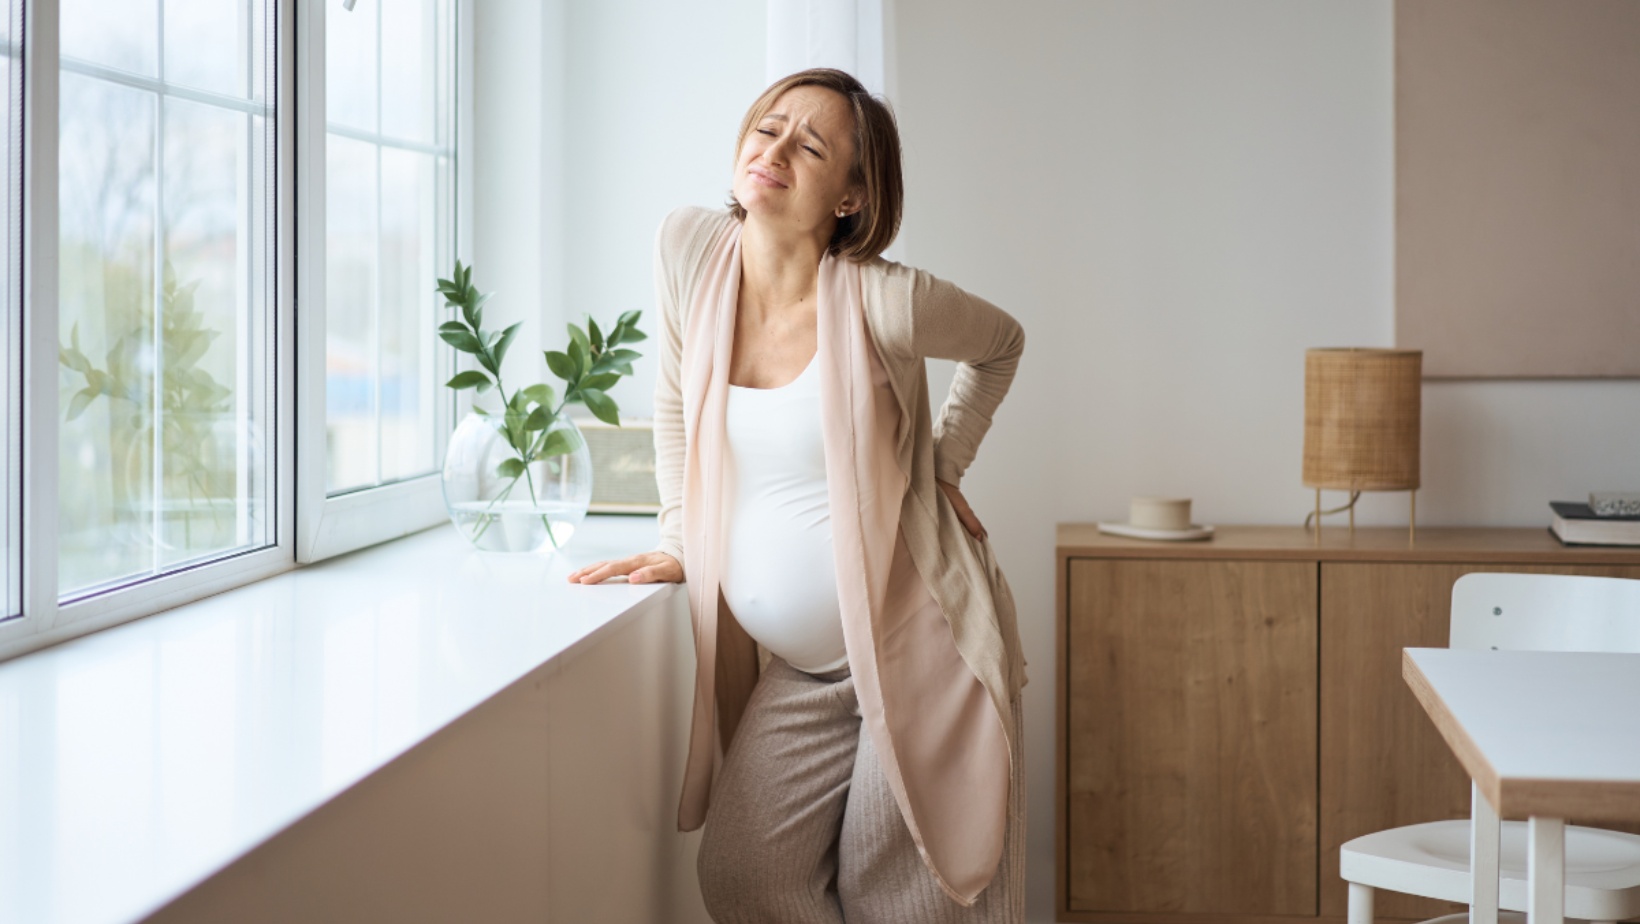 Pregnant person standing, leaning on a counter by a set of windows. They are expressing back pain, and their eyes are closed.